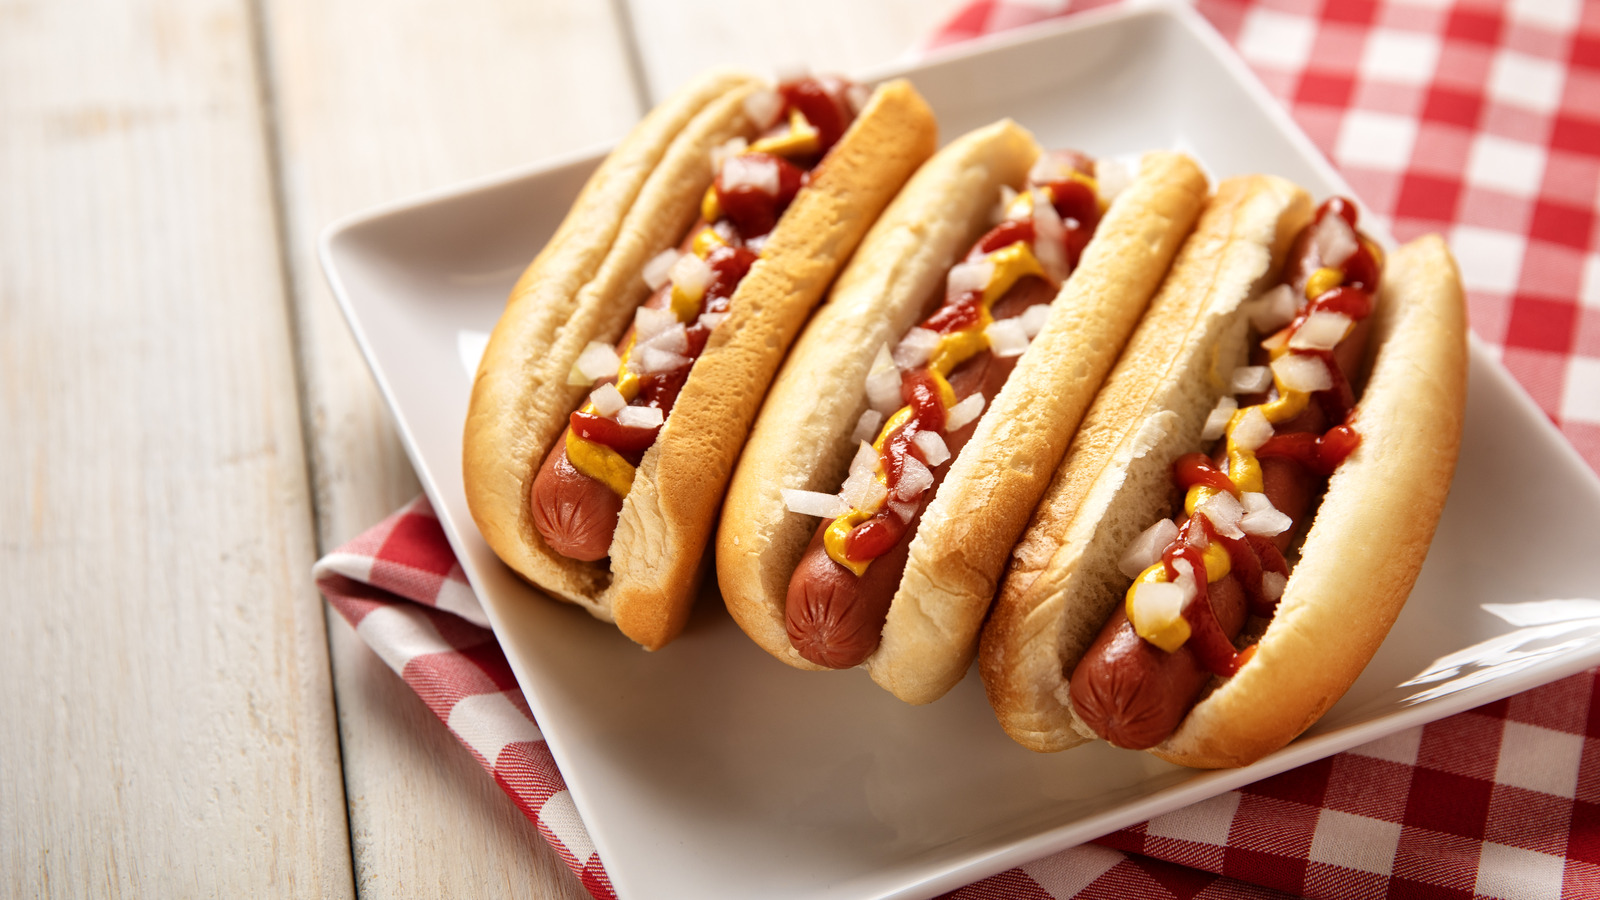 Easily Transport Cooked Hot Dogs To A Picnic With One Easy Hack